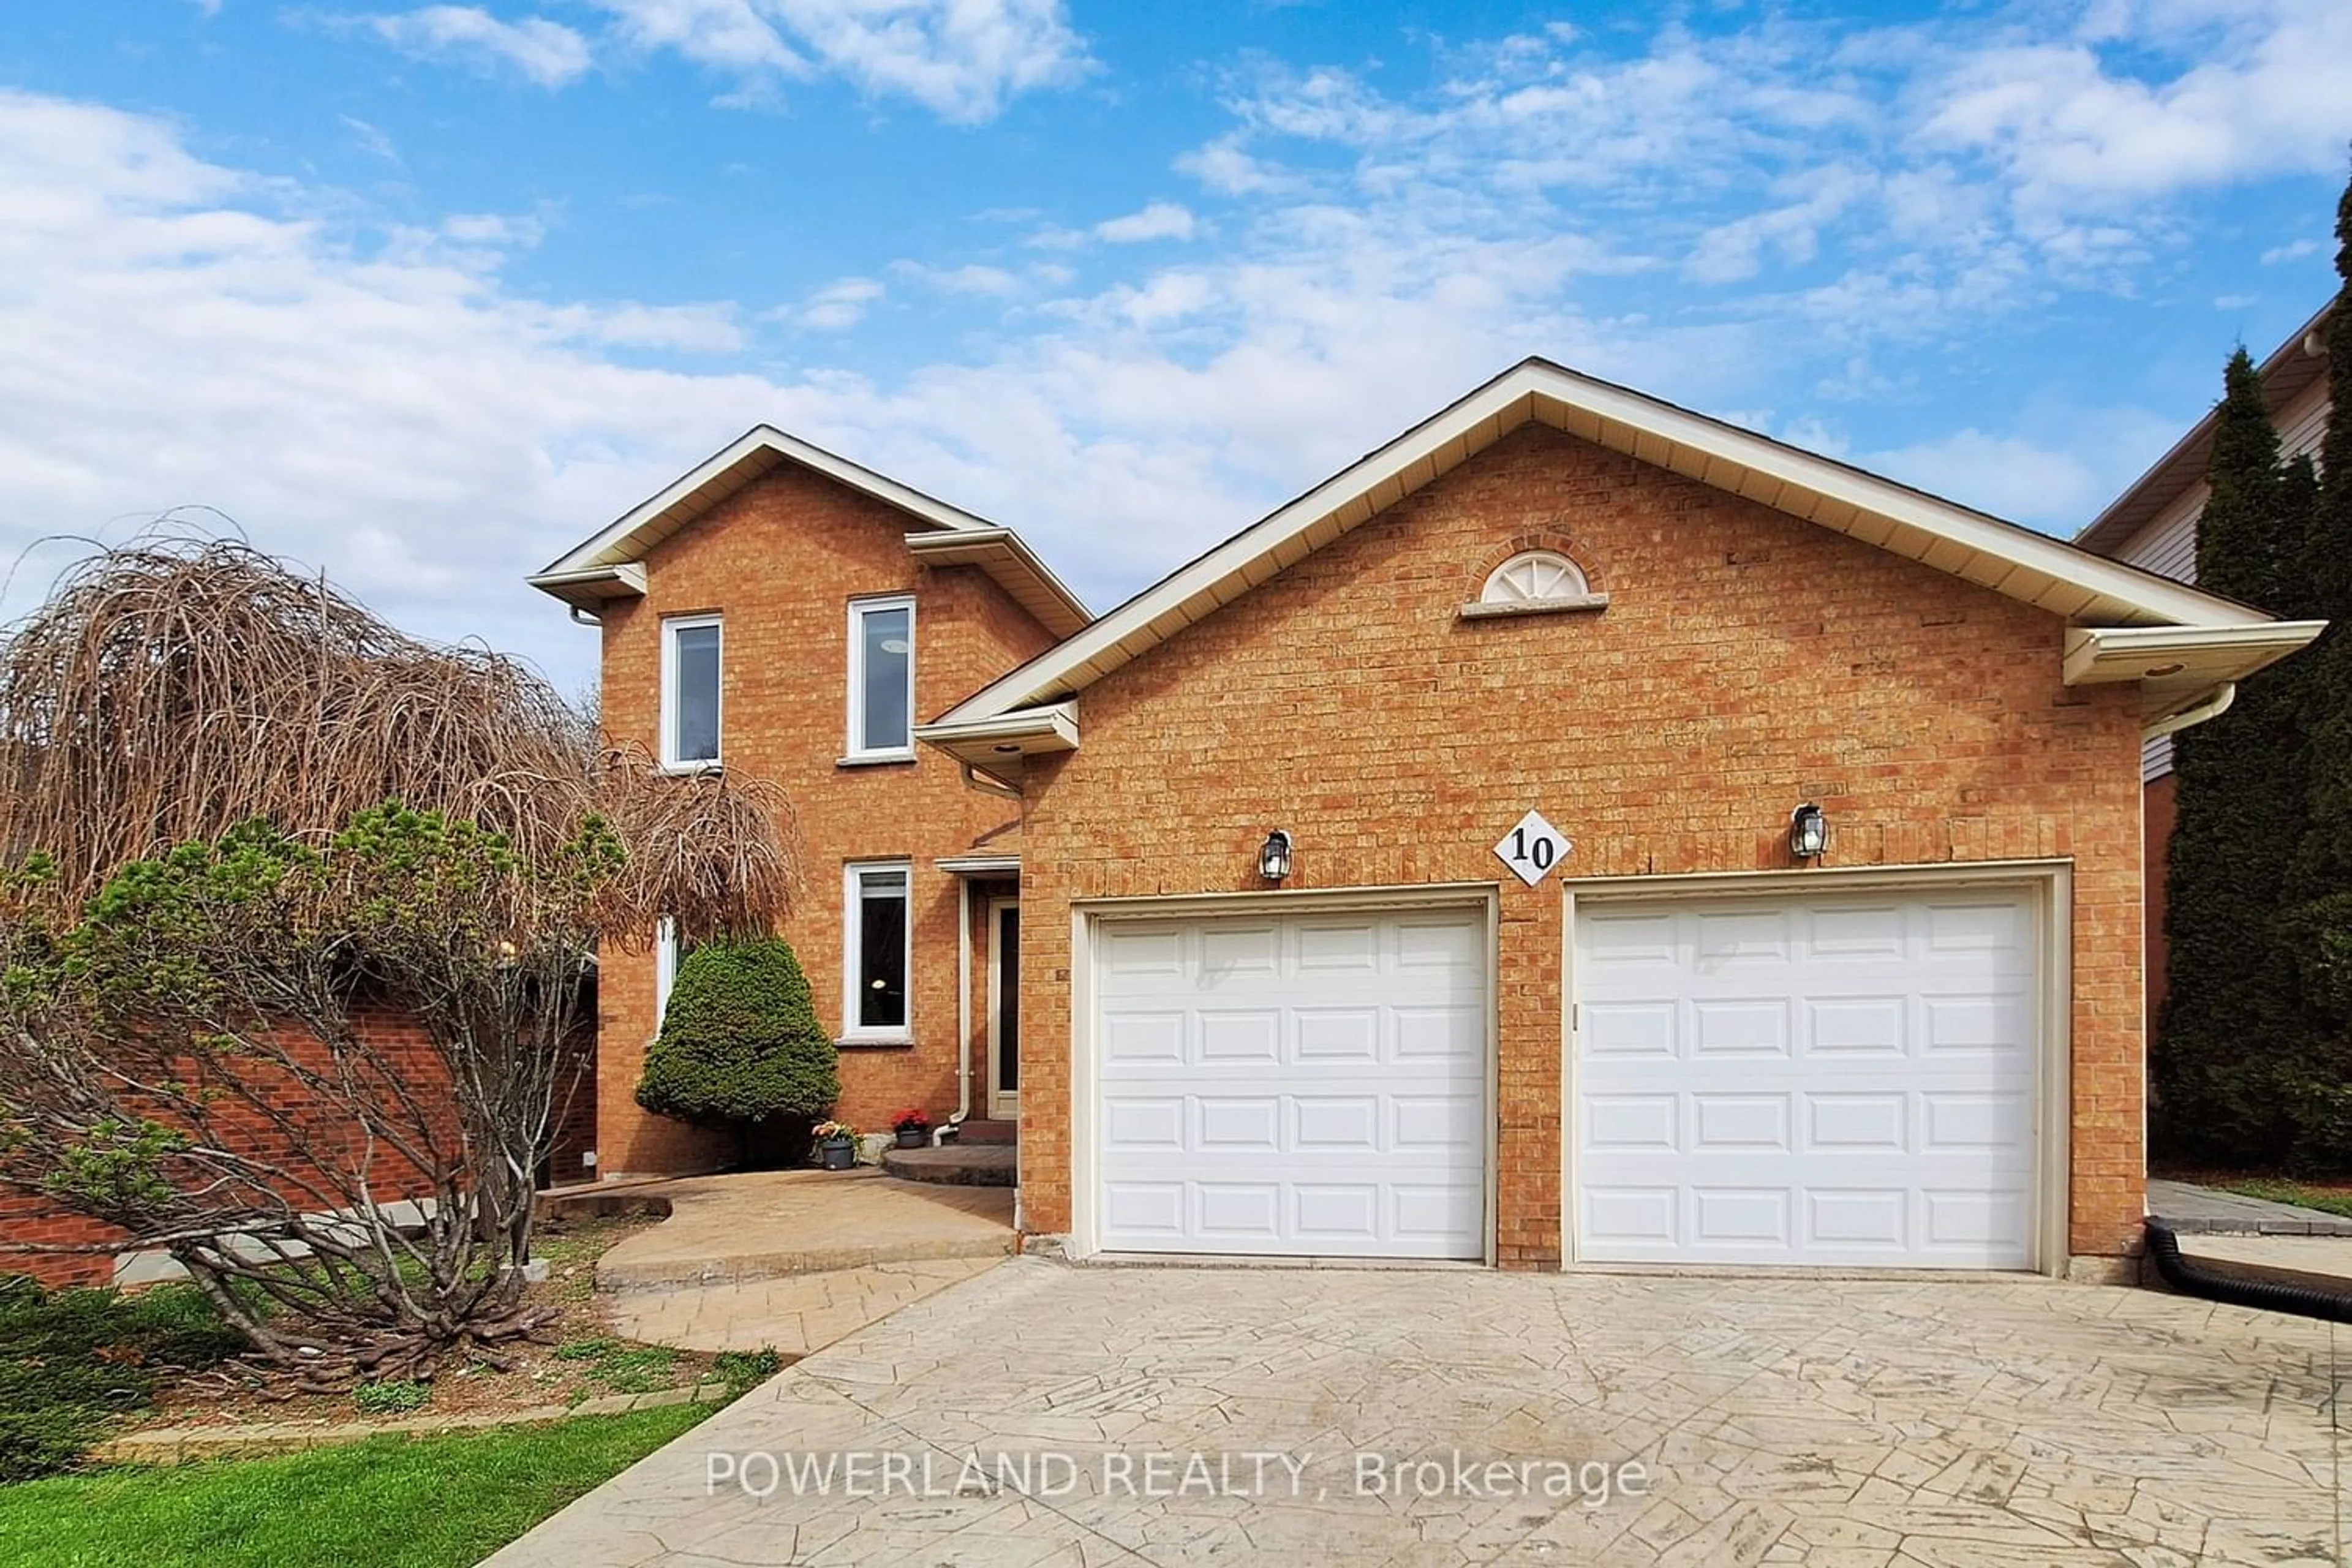 Home with brick exterior material for 10 Raiford St, Aurora Ontario L4G 6J2